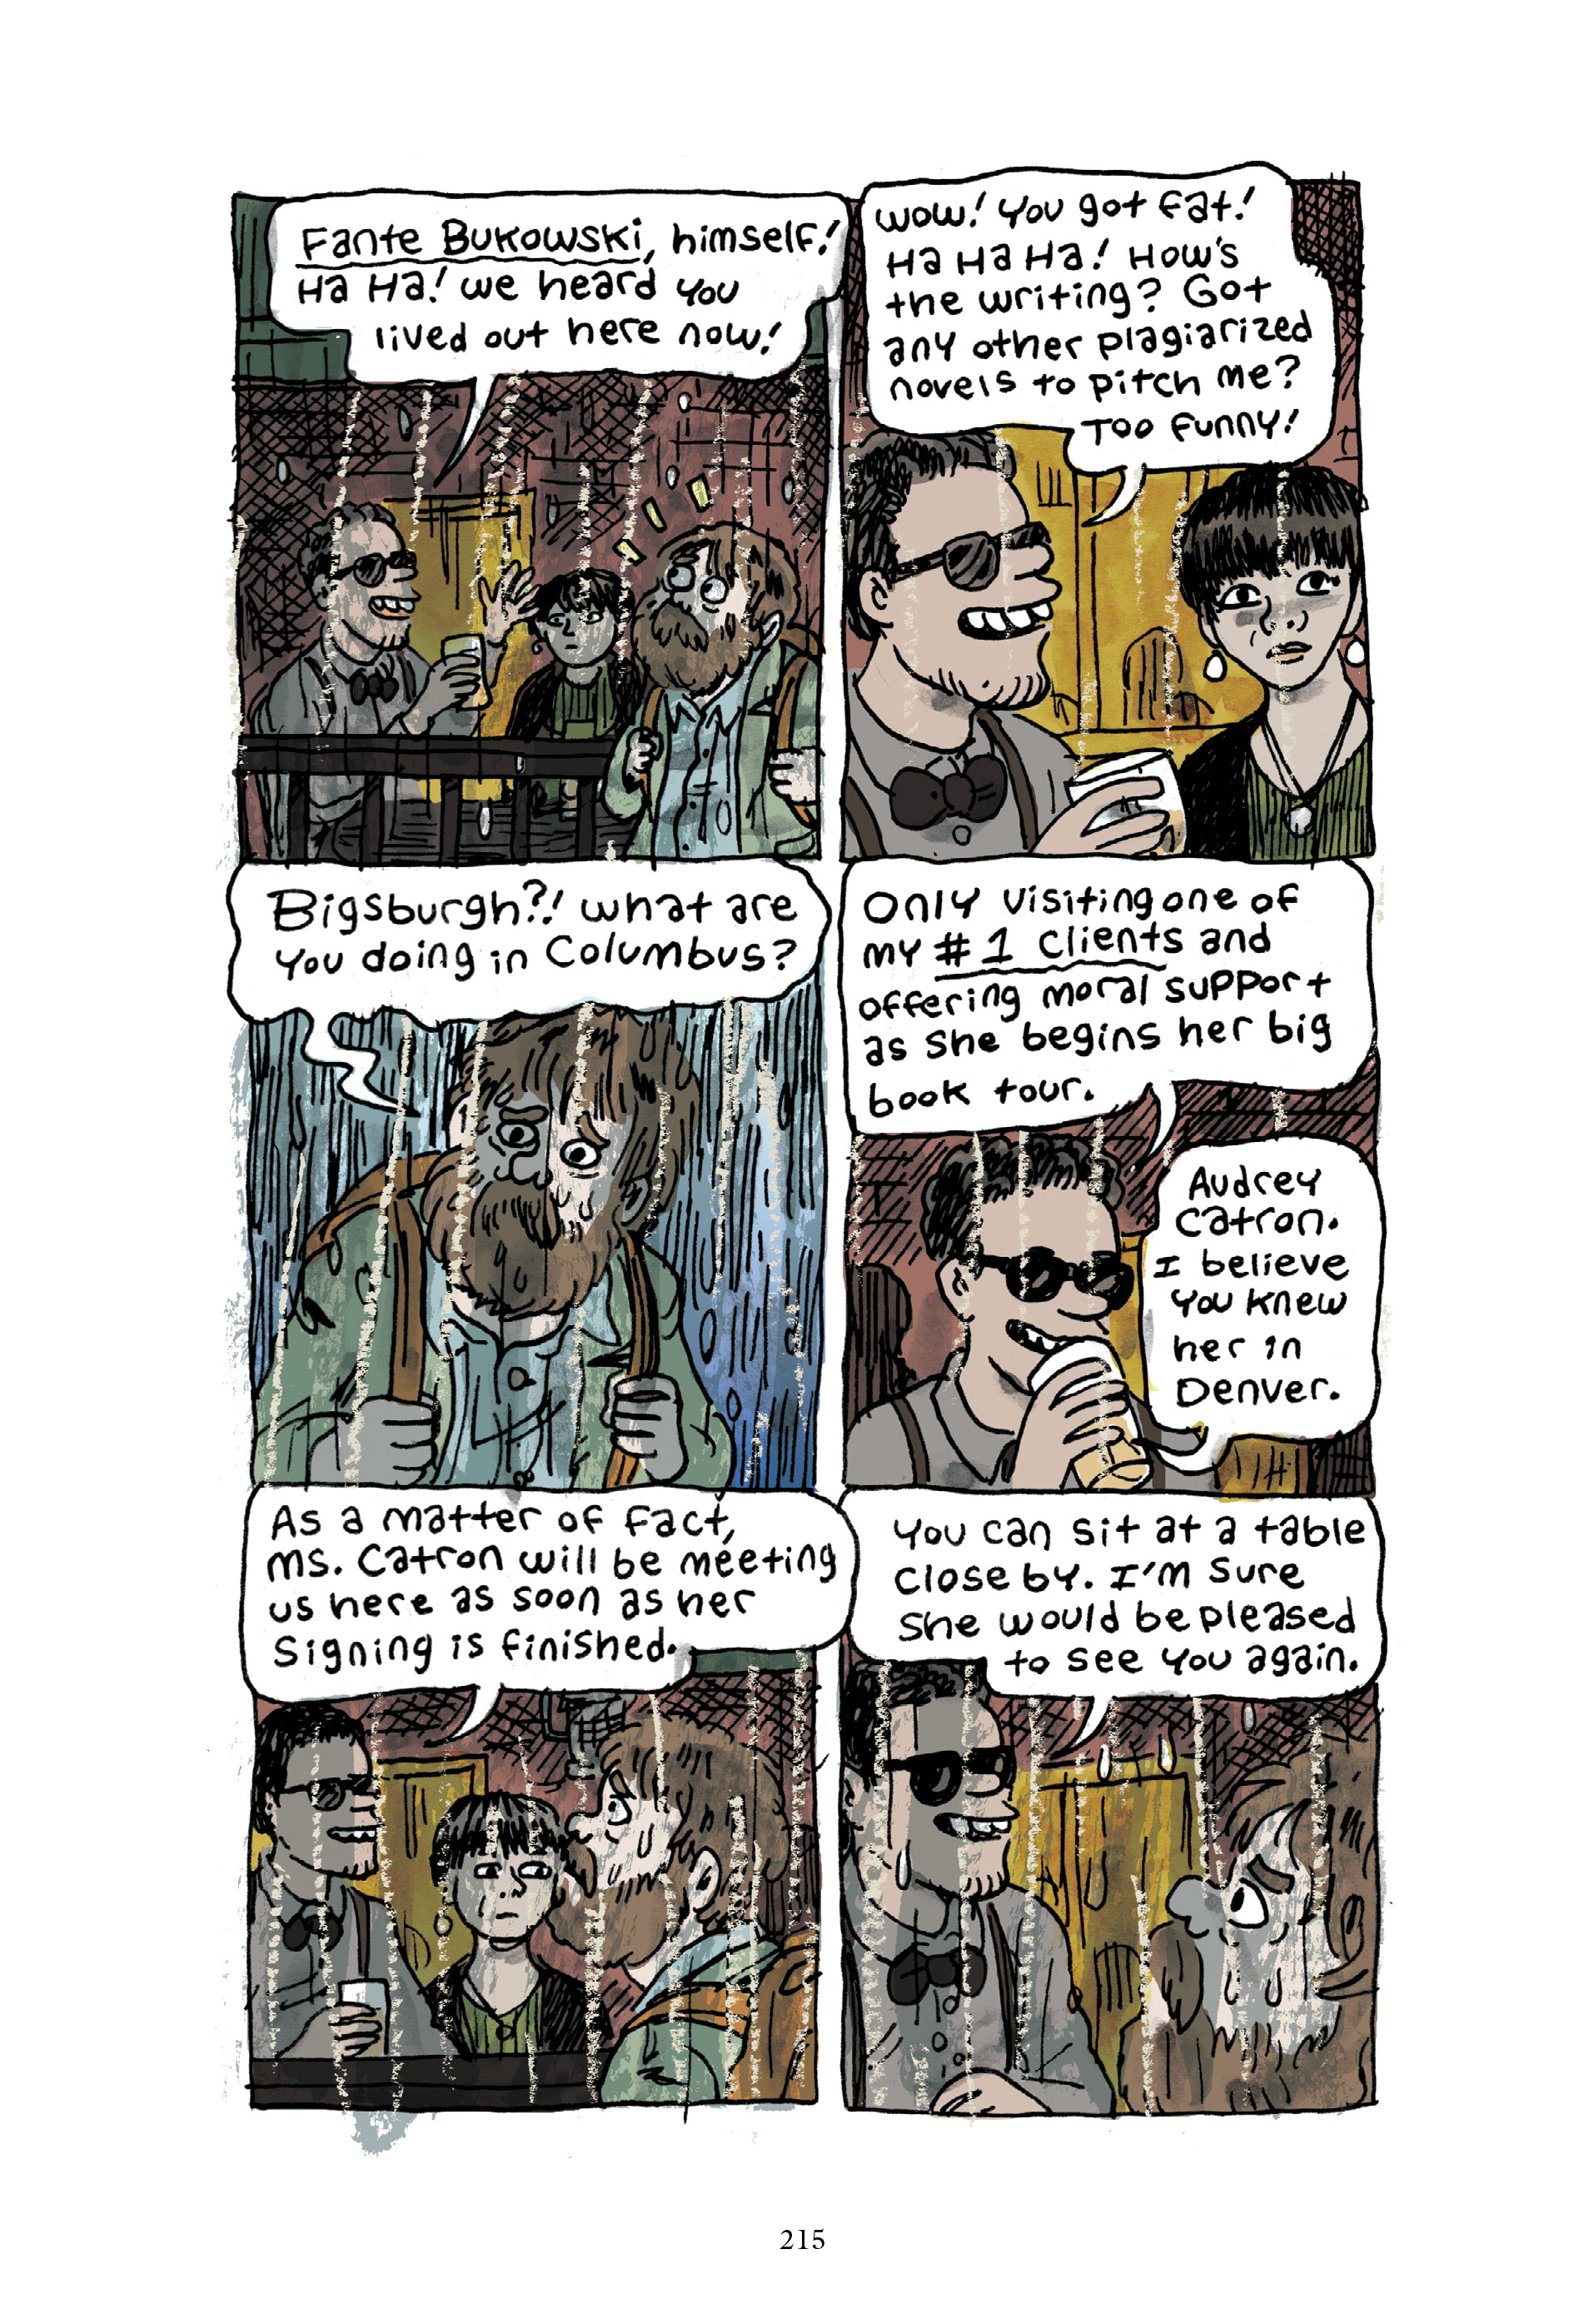 Read online The Complete Works of Fante Bukowski comic -  Issue # TPB (Part 3) - 13